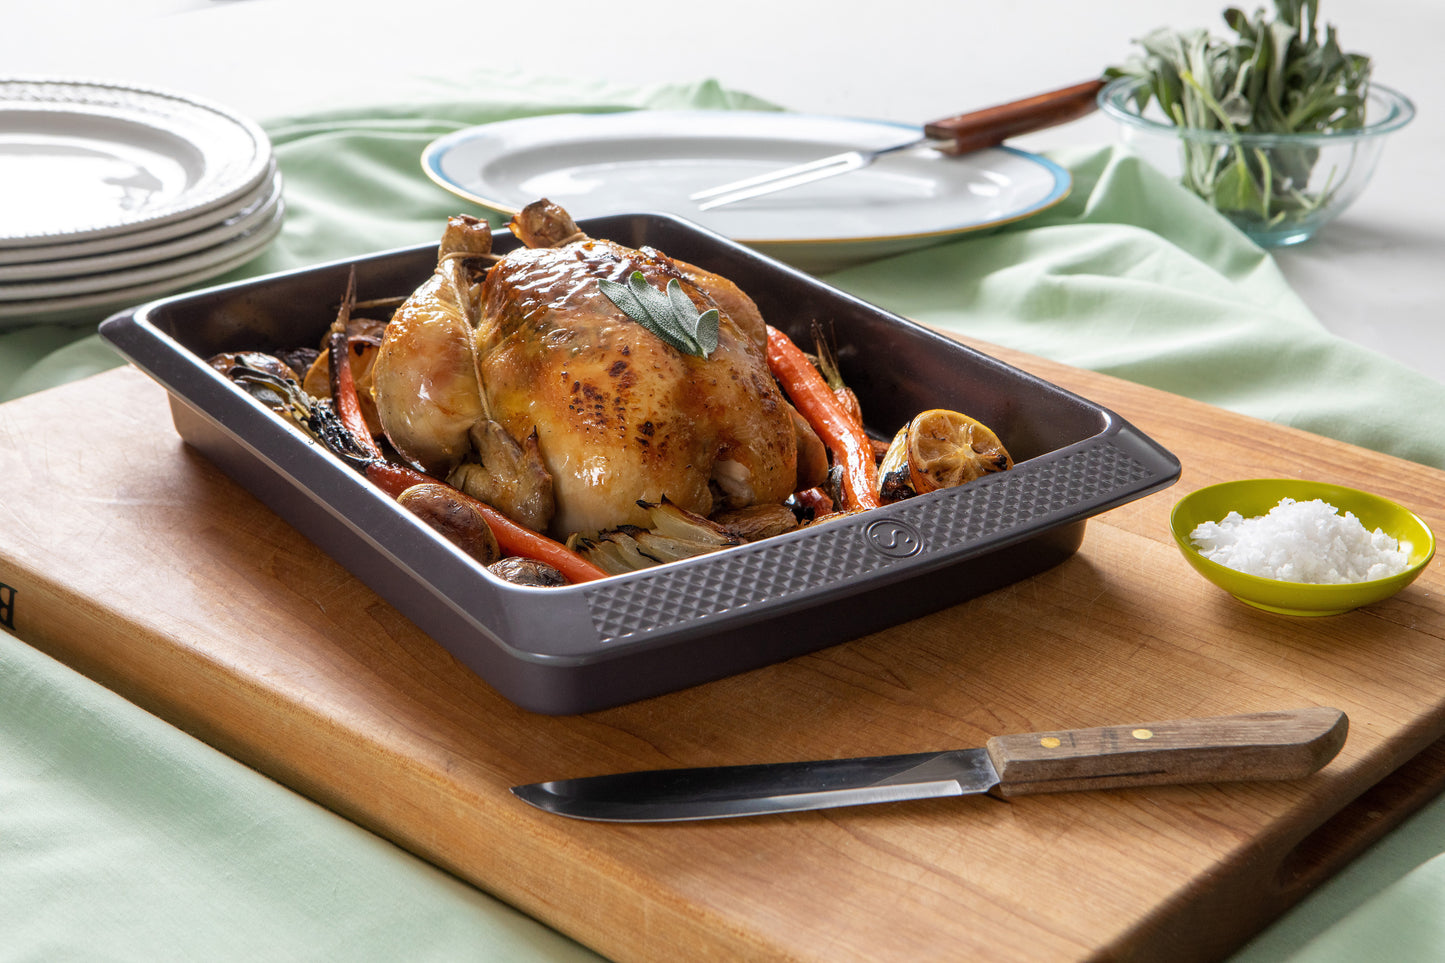 10-Inch by 14-Inch Roasting Pan